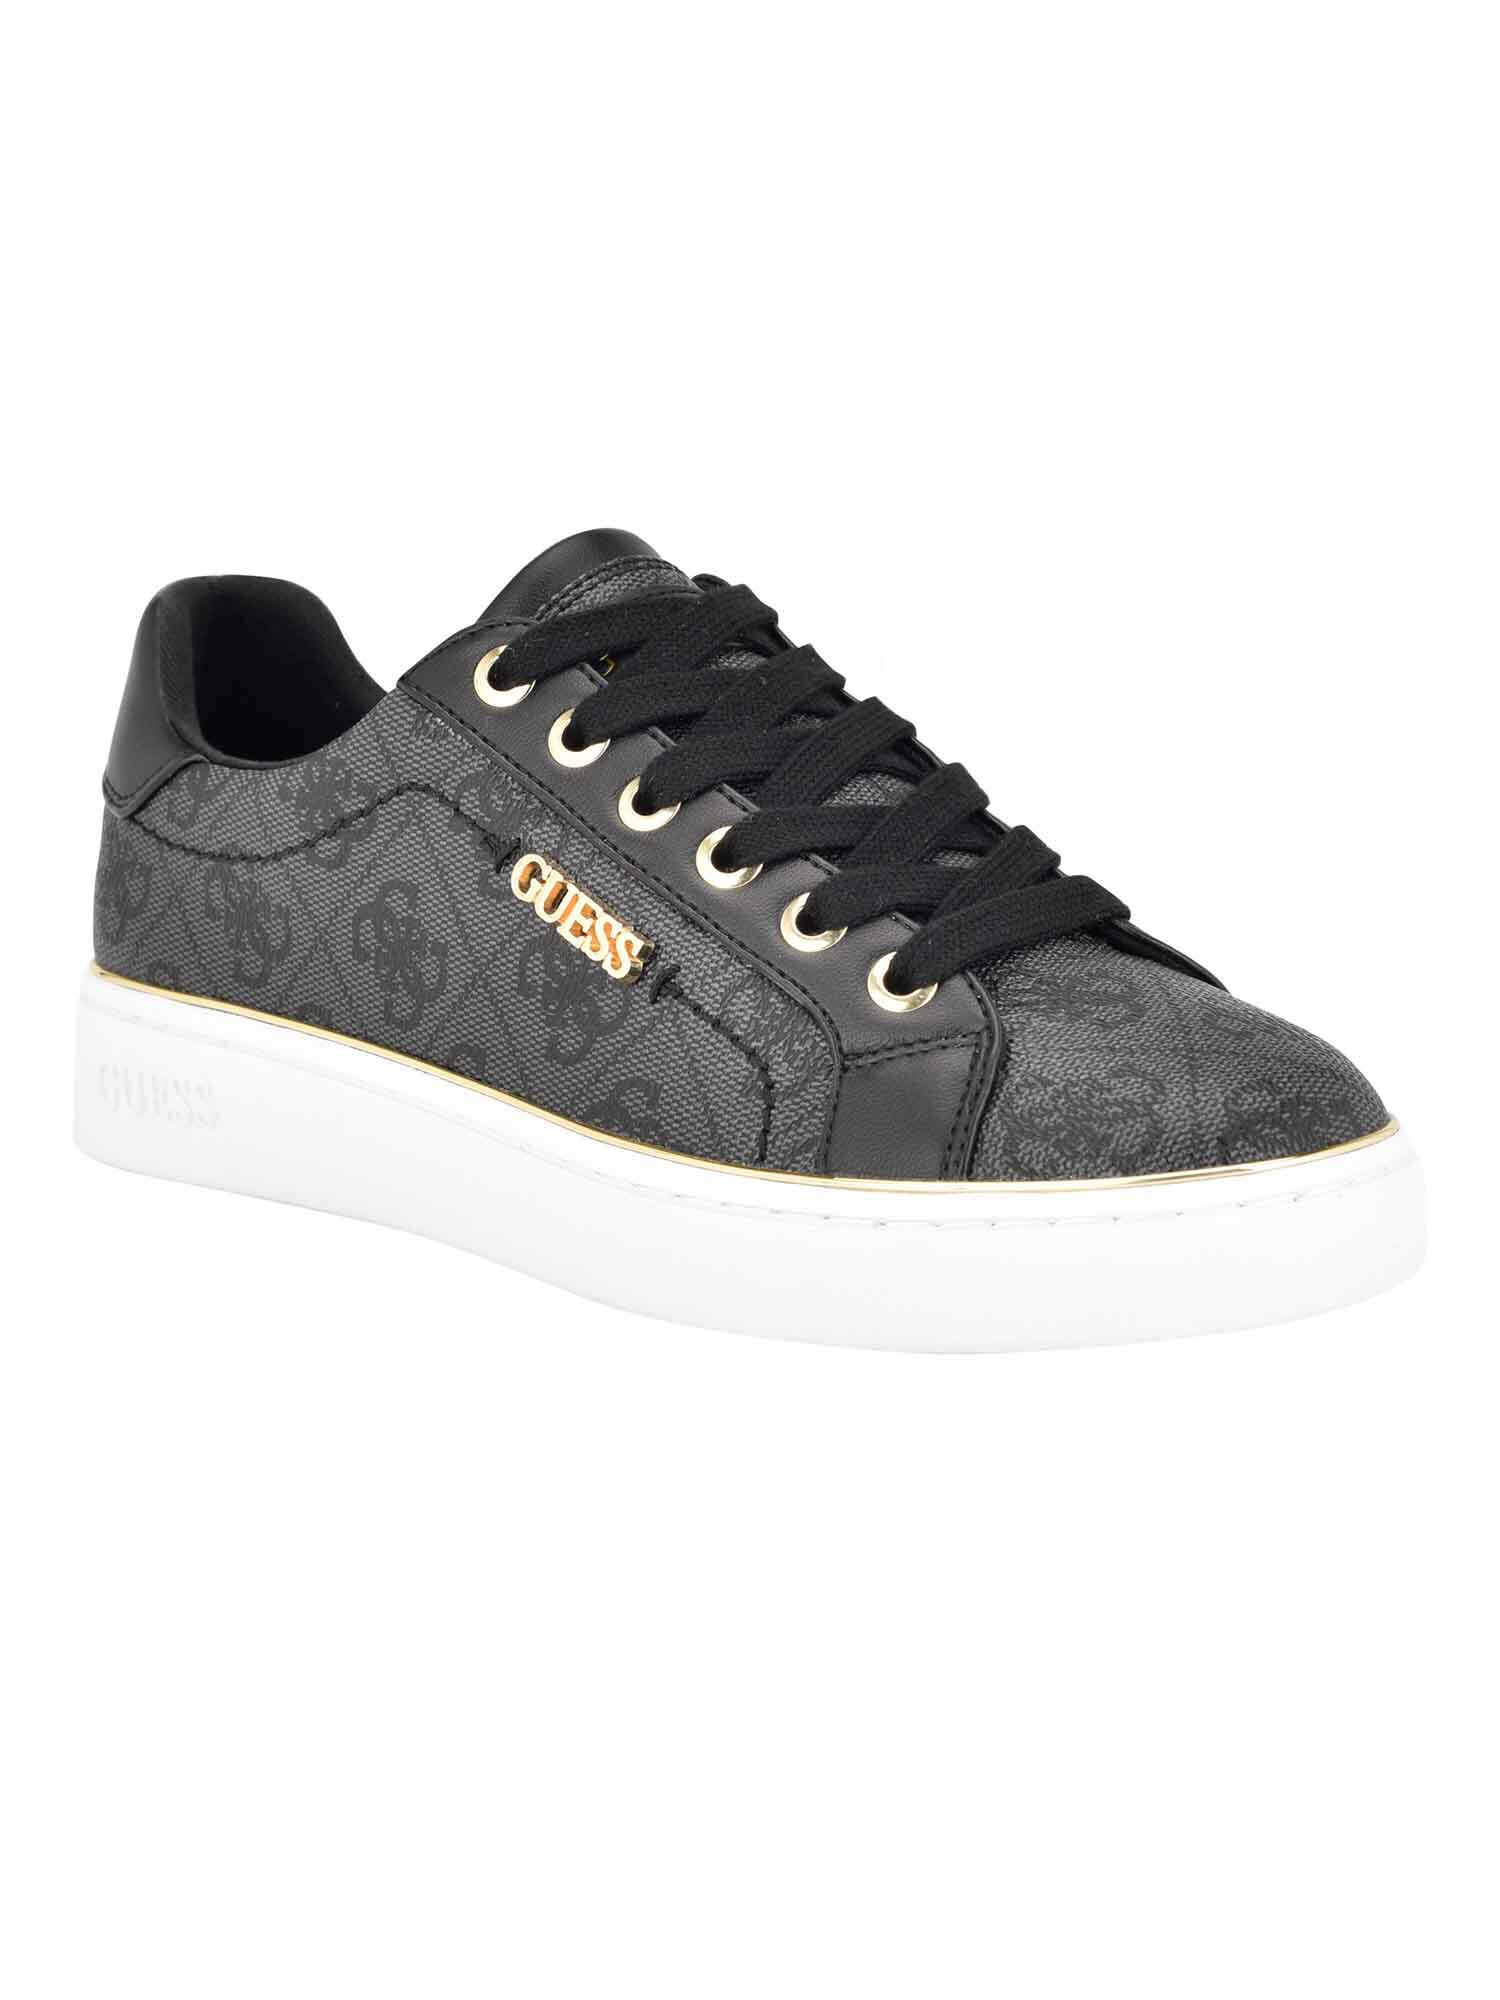 Guess Shoes Women Sneaker Rorii in Leather White India | Ubuy